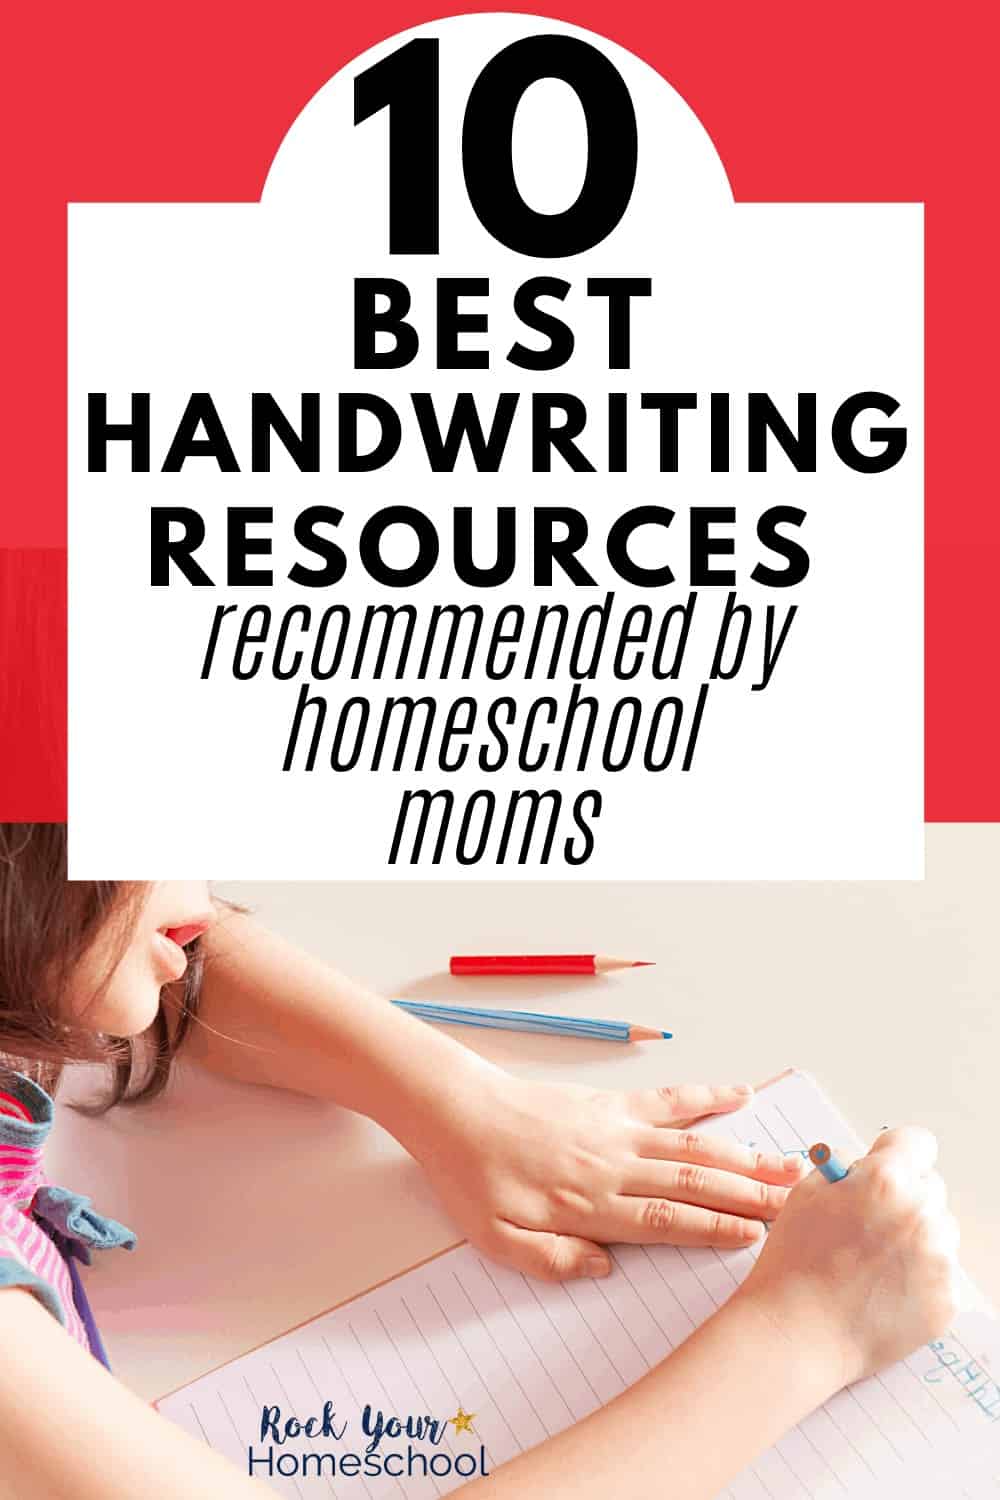 10 Best Handwriting Resources Recommended by Homeschool Moms